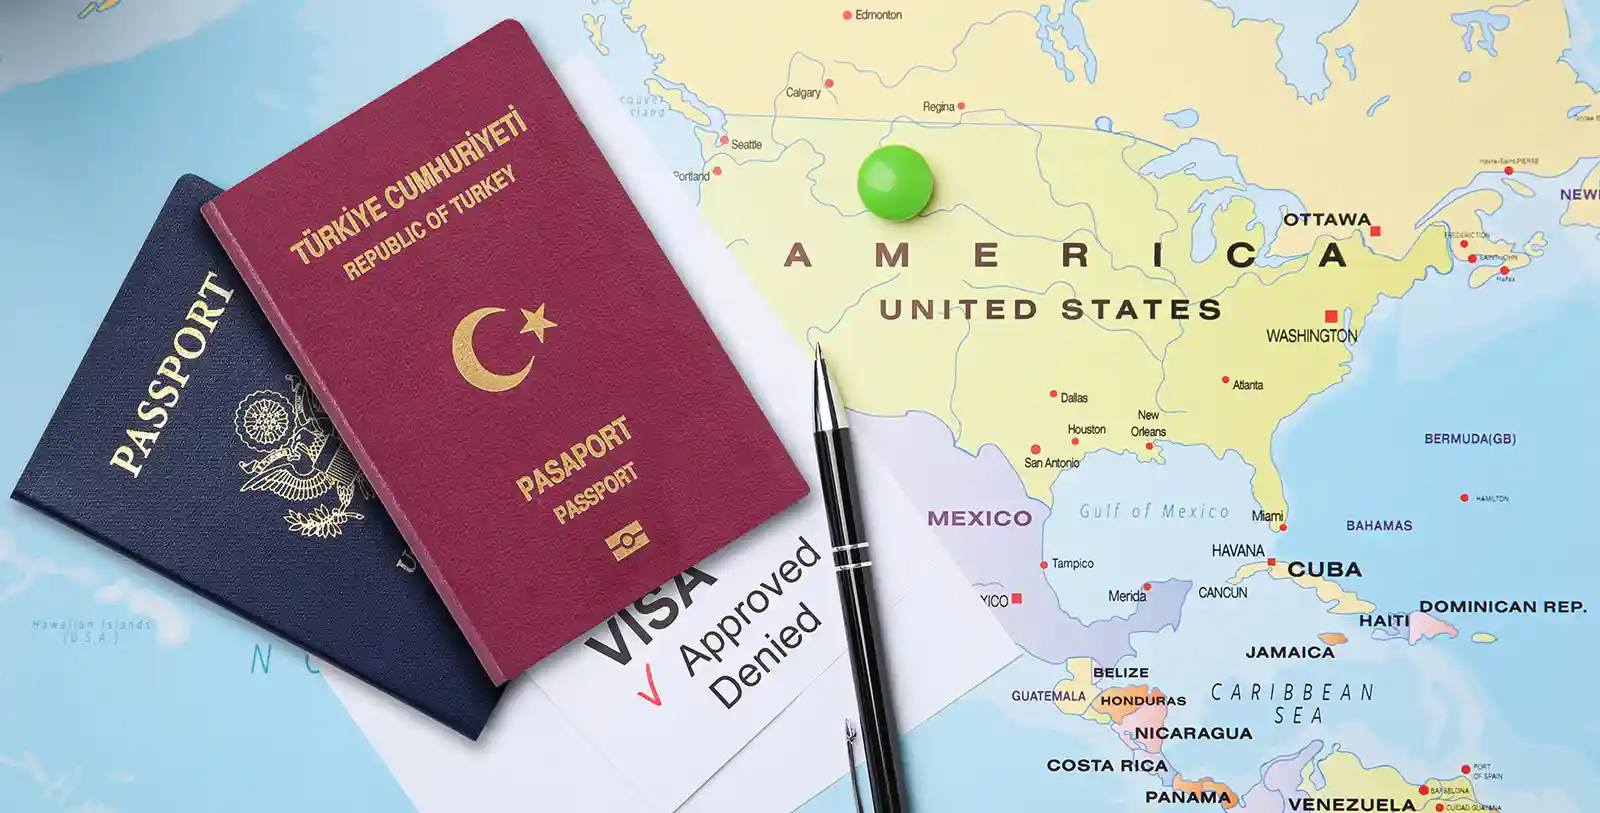 With your Turkish passport you can apply to E2 Visa from USA